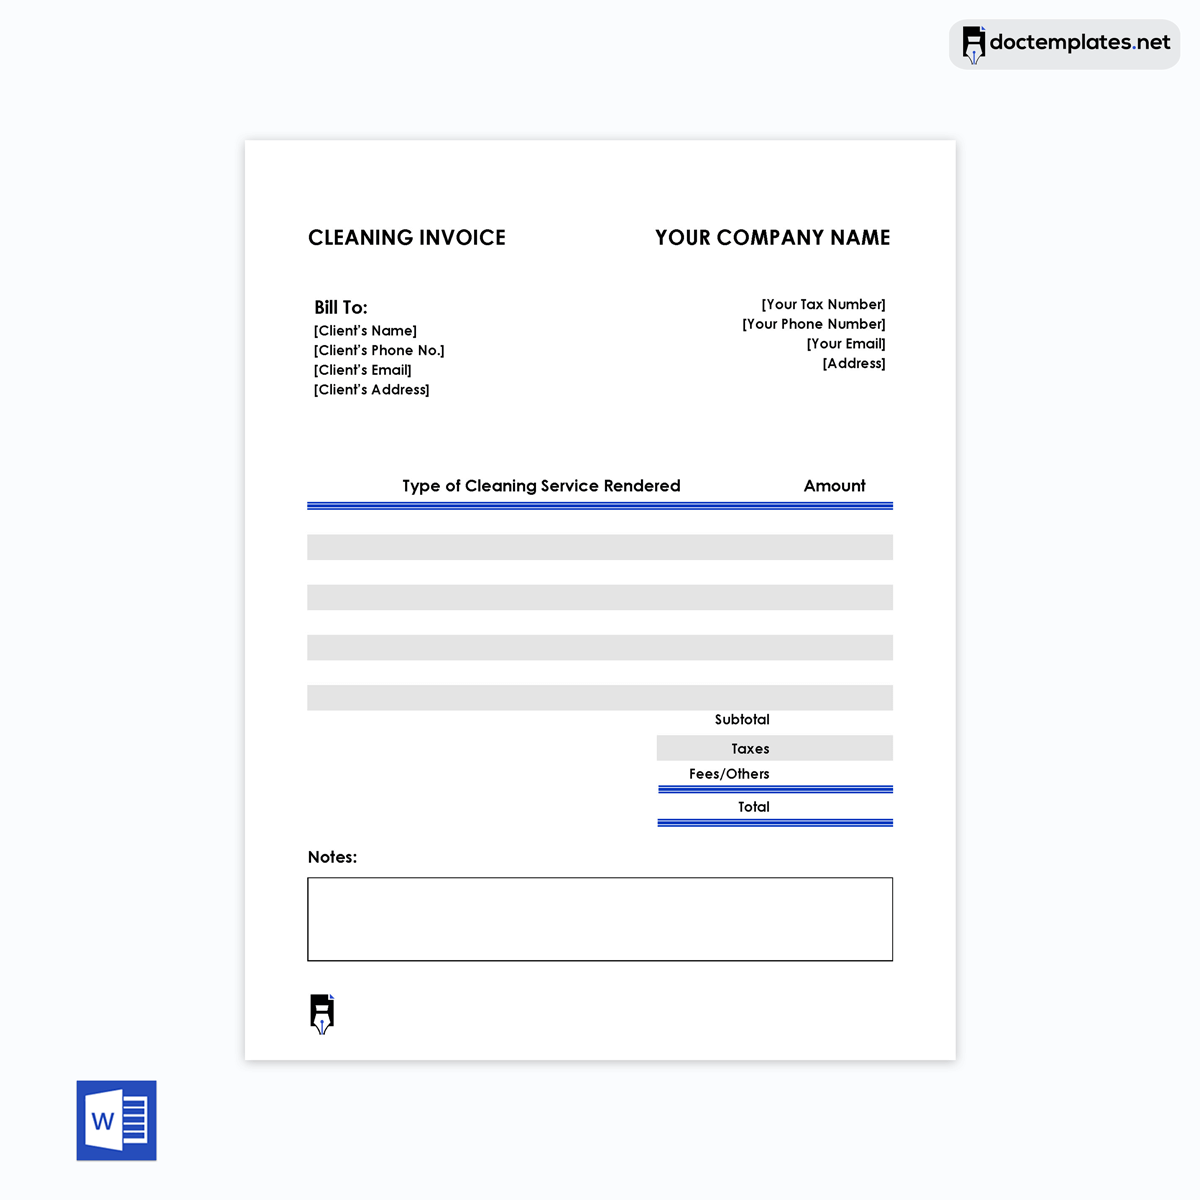 Cleaning services invoice example-09 